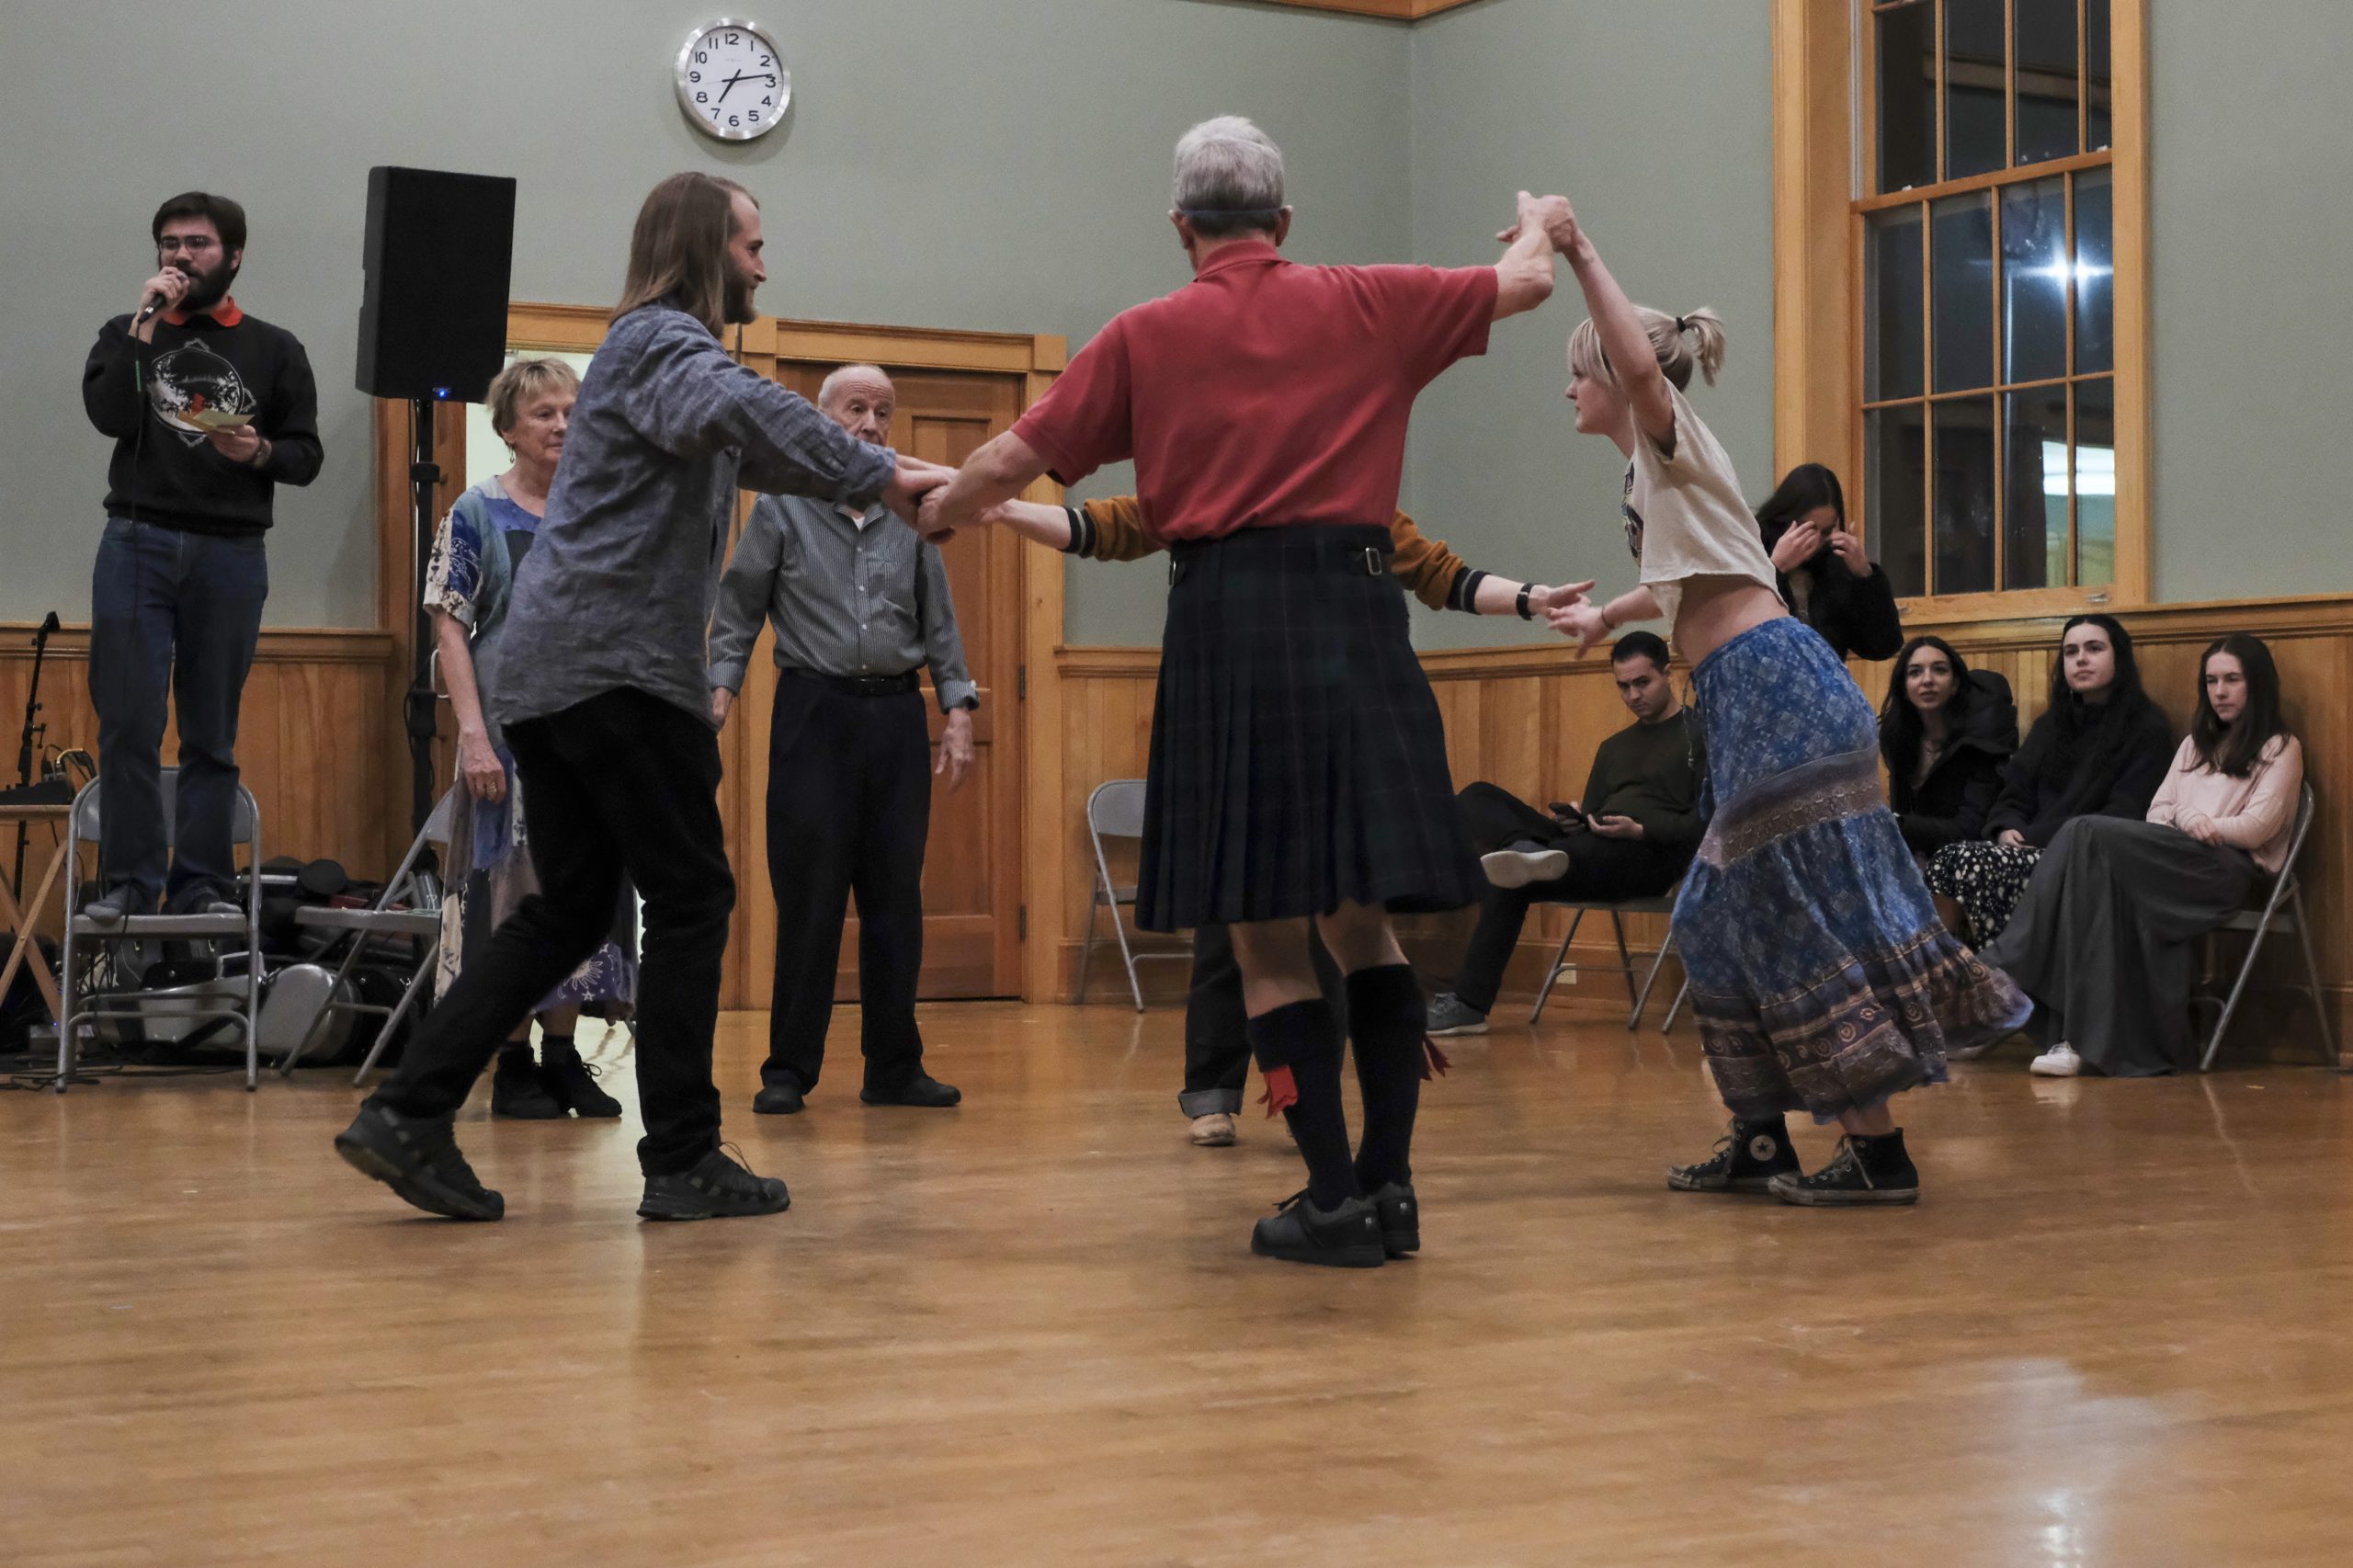 A group of five people of different ages and genders hold hands in a circle and dance. A caller is seen to the left and others are sitting to the right.